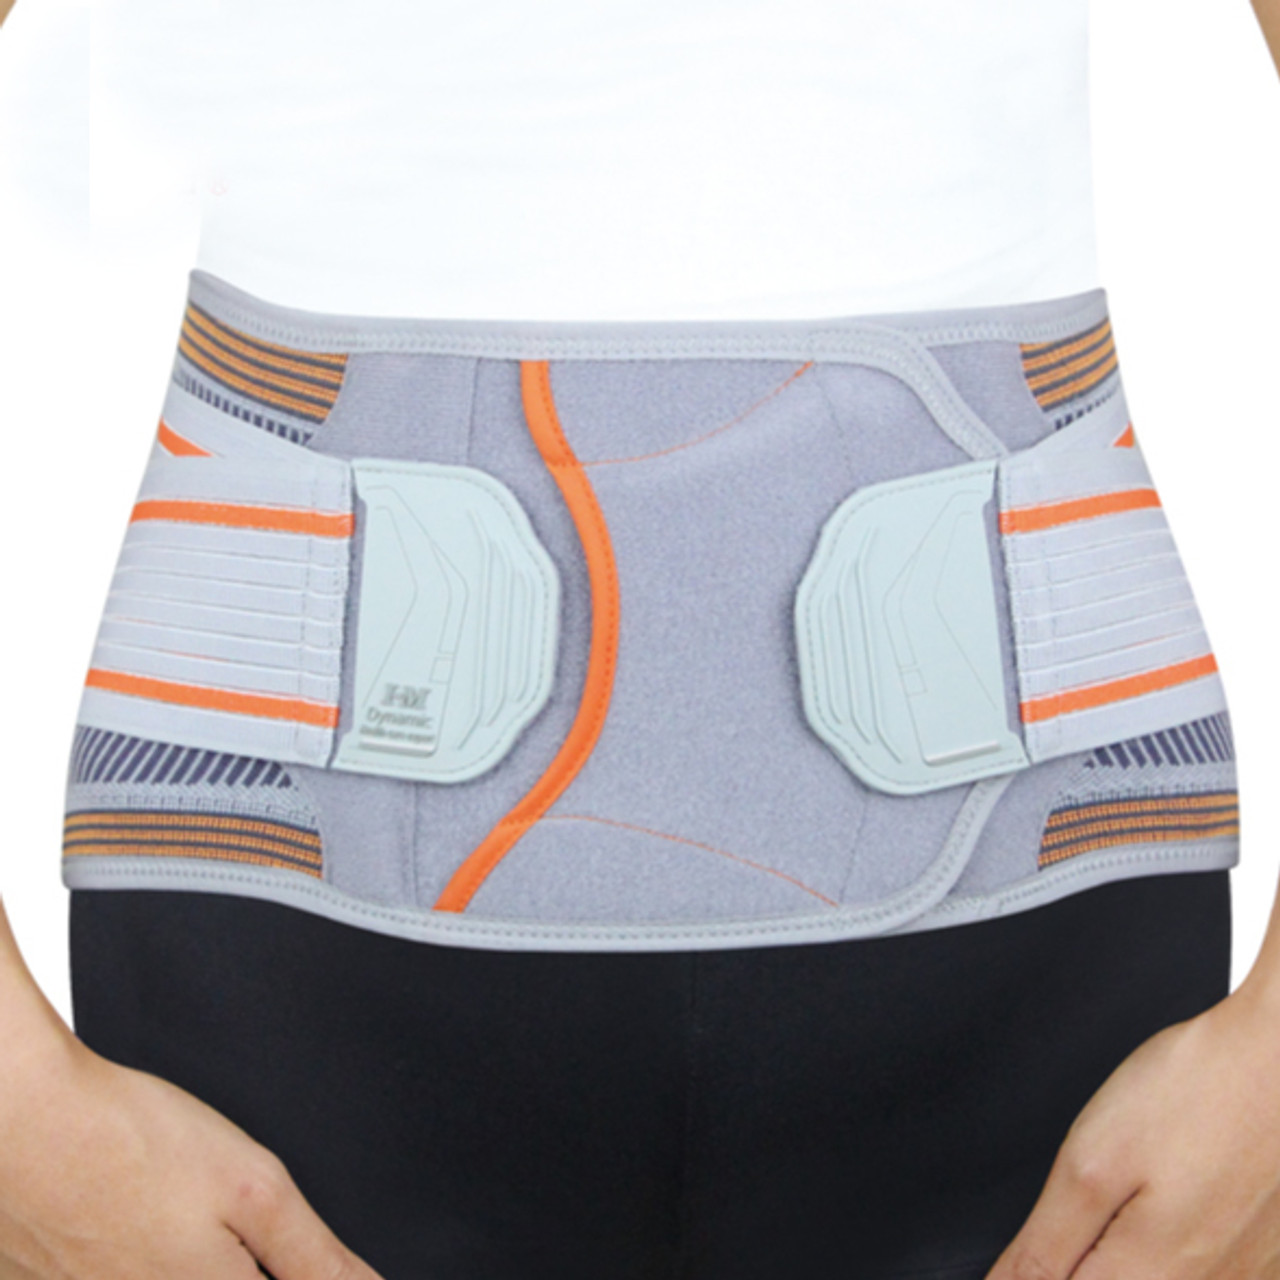 Orthoactive 5549 Elastic Lumbo-Sacral Back Support with Sacral Pad Small